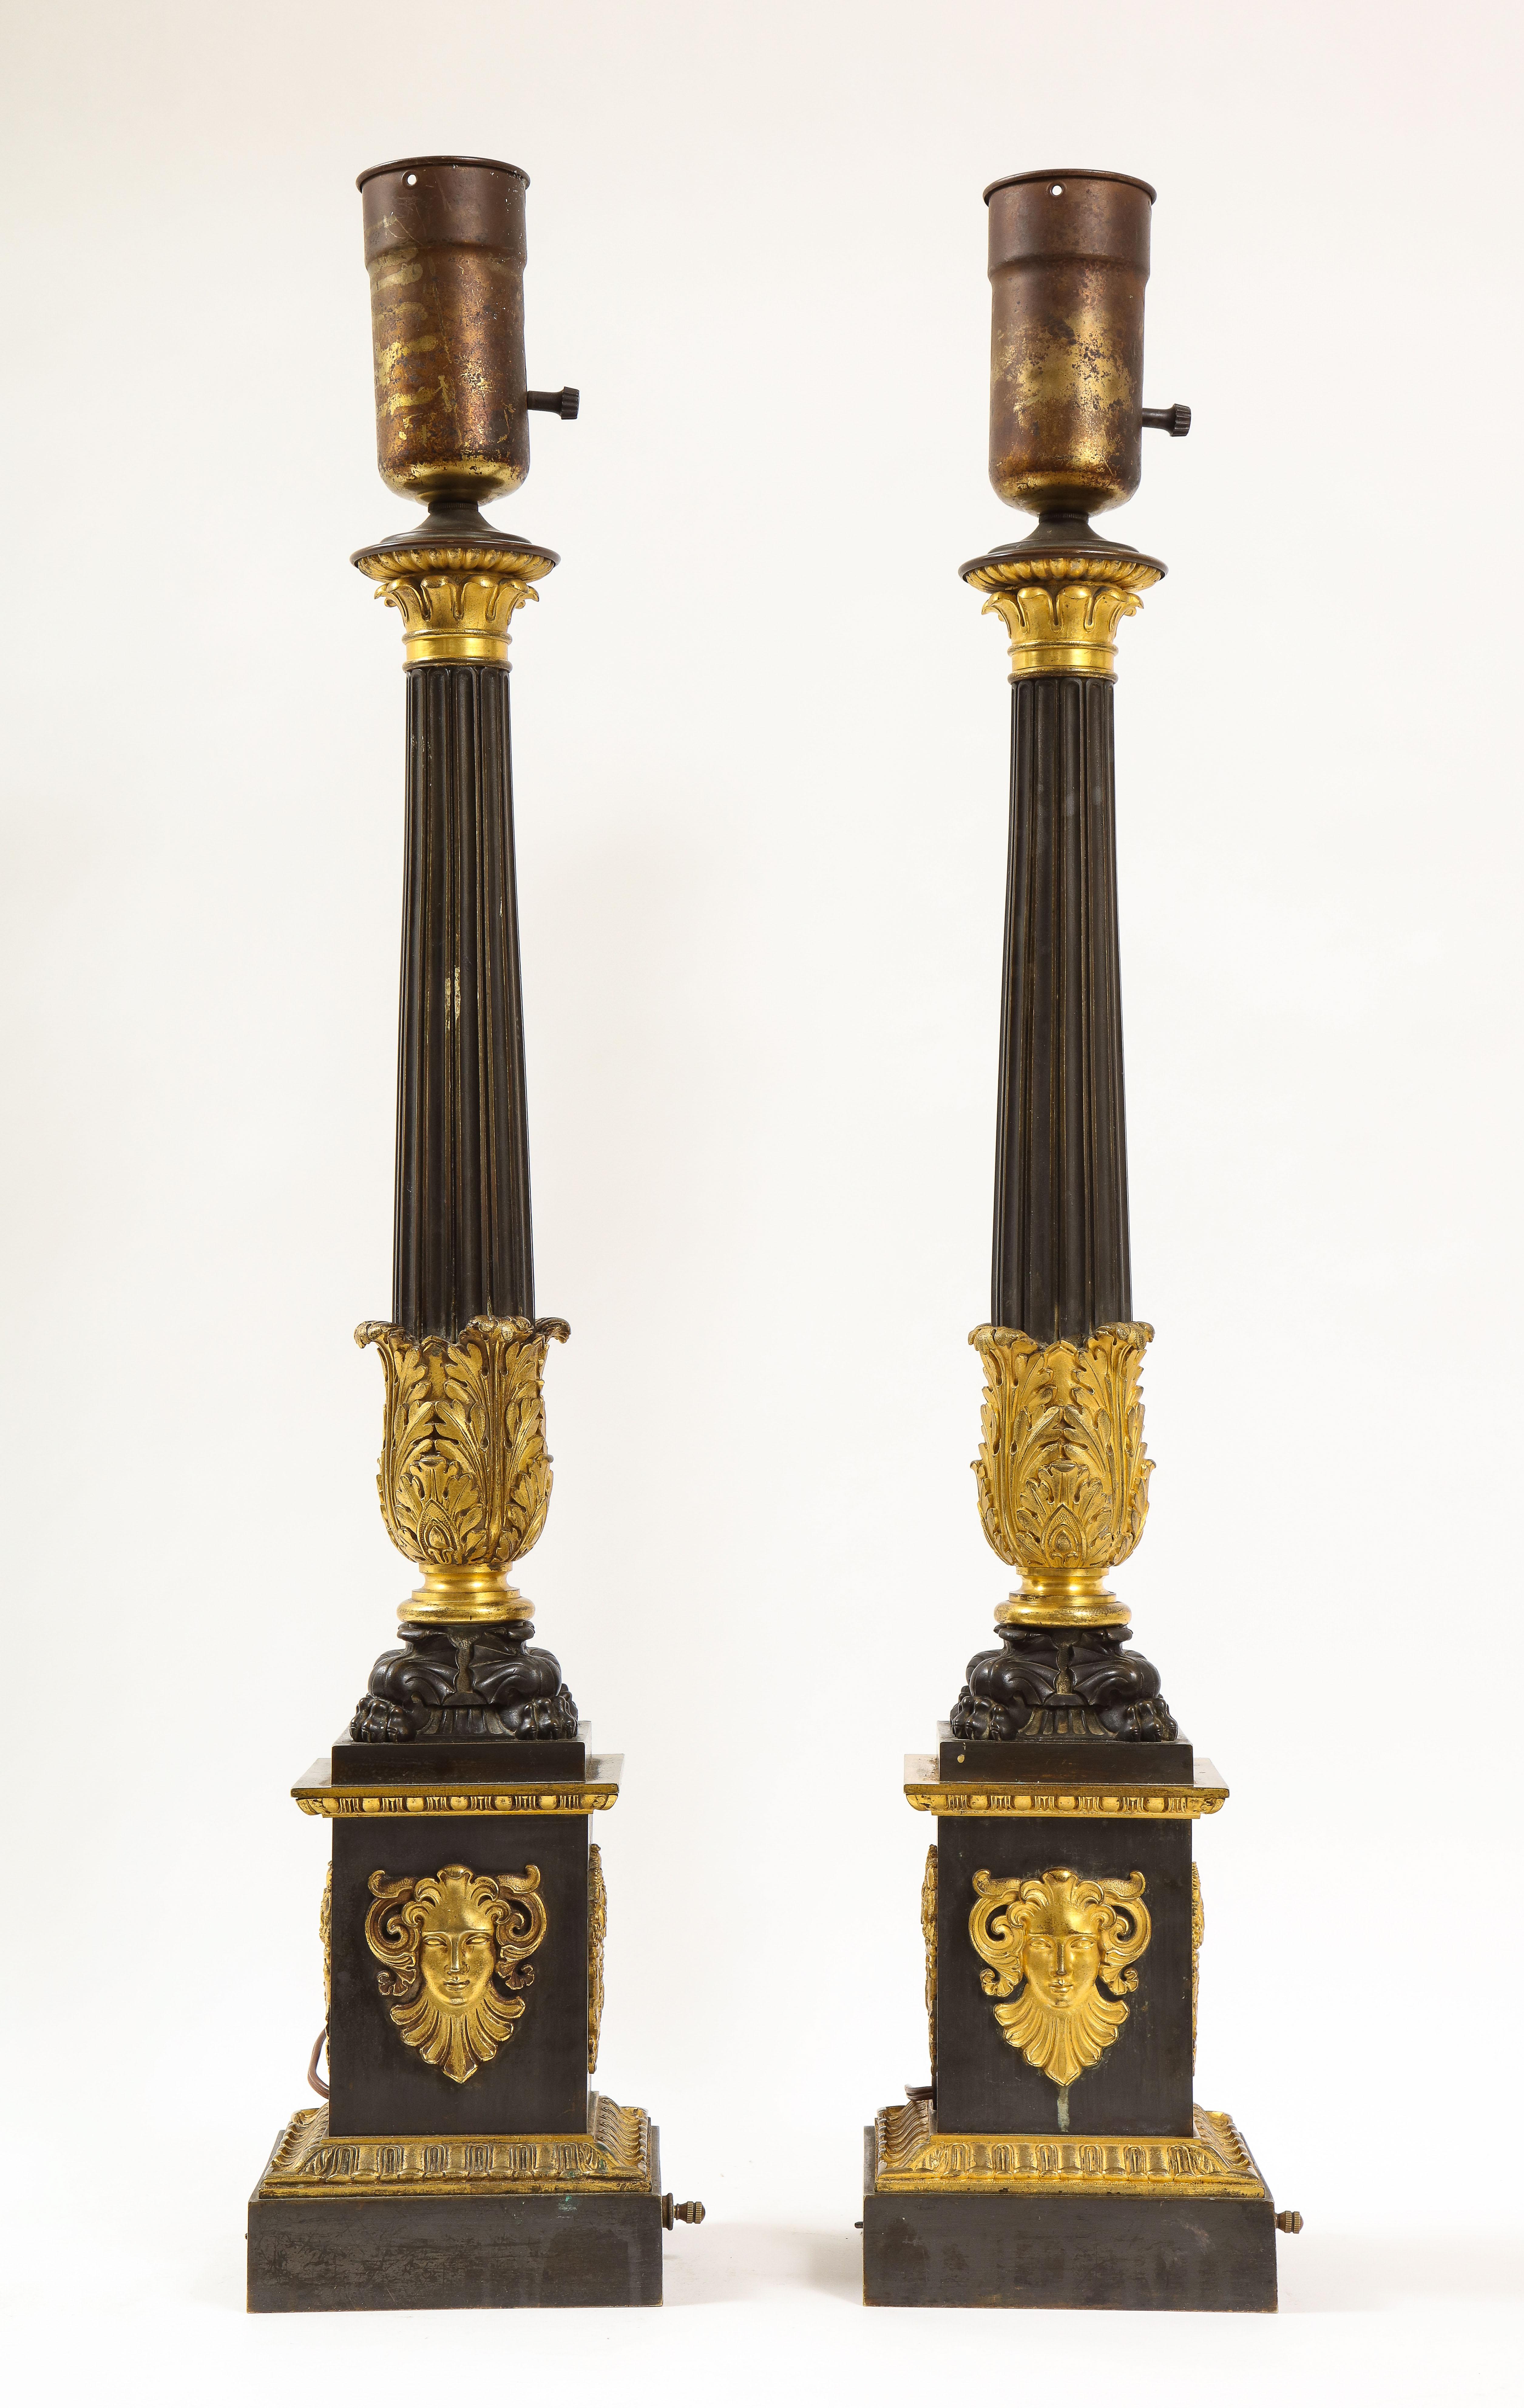 A fantastic pair of French empire period patinated and dore bronze candlesticks mounted as lamps. Each is beautifully cast, hand-chased, and hand-chiseled with the finest quality of burnished and matted dore bronze mounts. The fluted columnar bodies